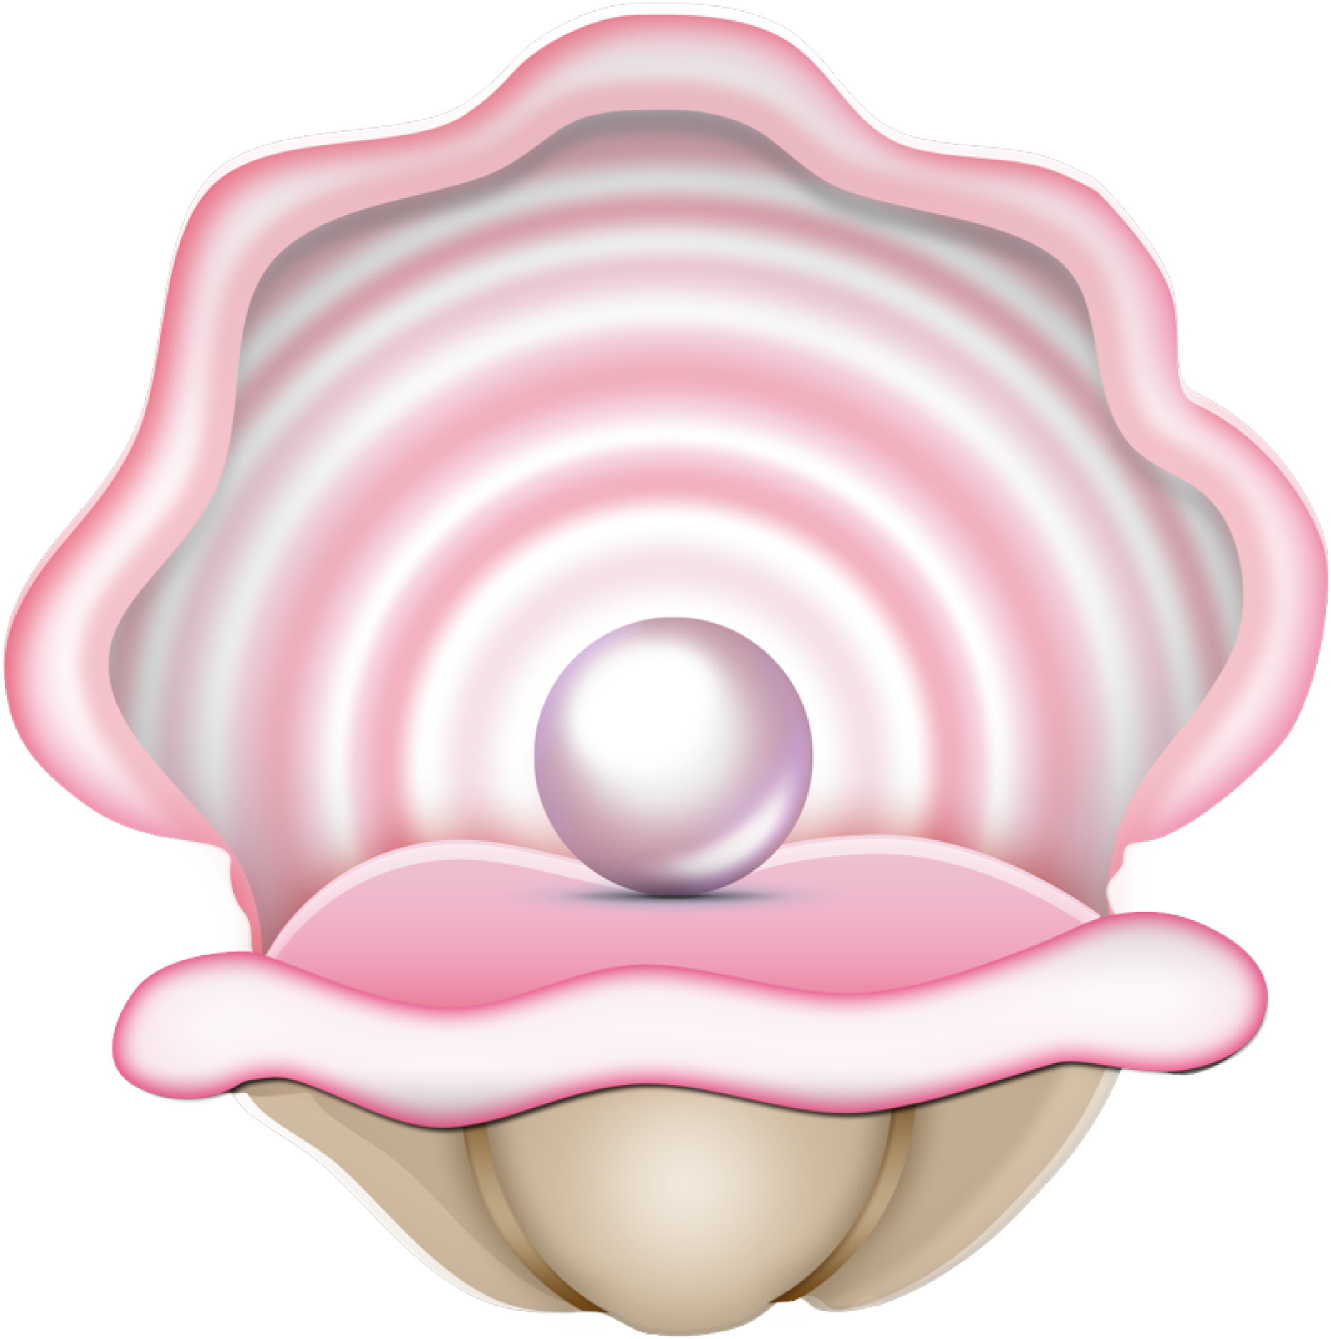 Shell clipart form. Oyster cartoon png transparent